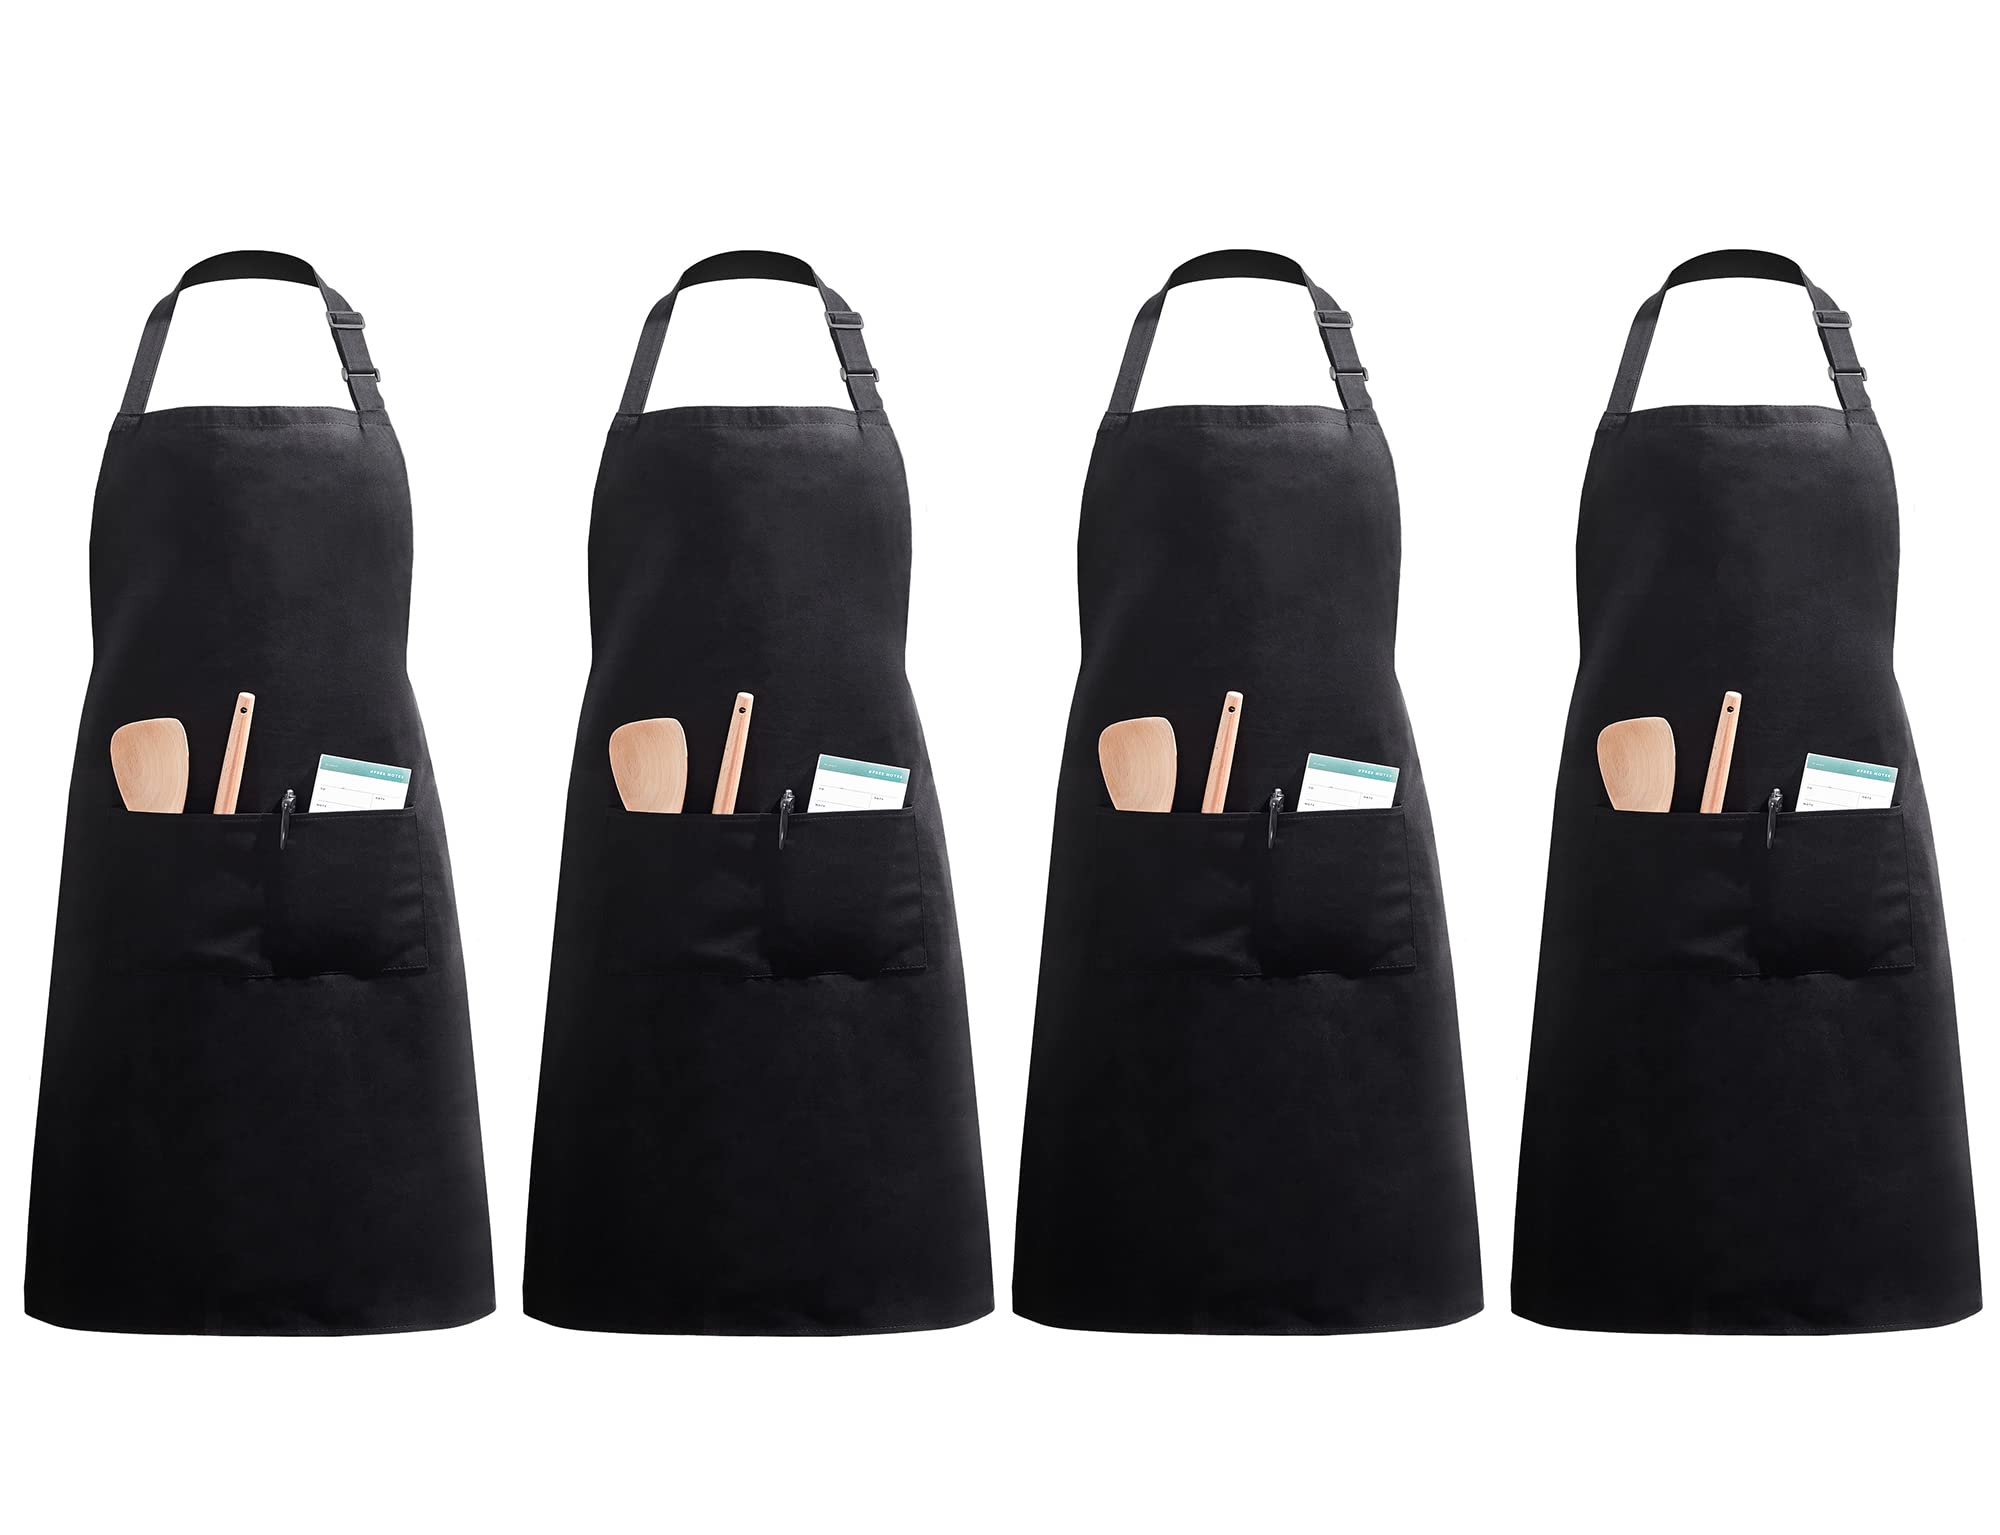 InnoGear 4 Packs Apron, Unisex Adjustable Apron with Pockets for Home Kitchen Cooking, Restaurant, Coffee house (Black, Polyester)